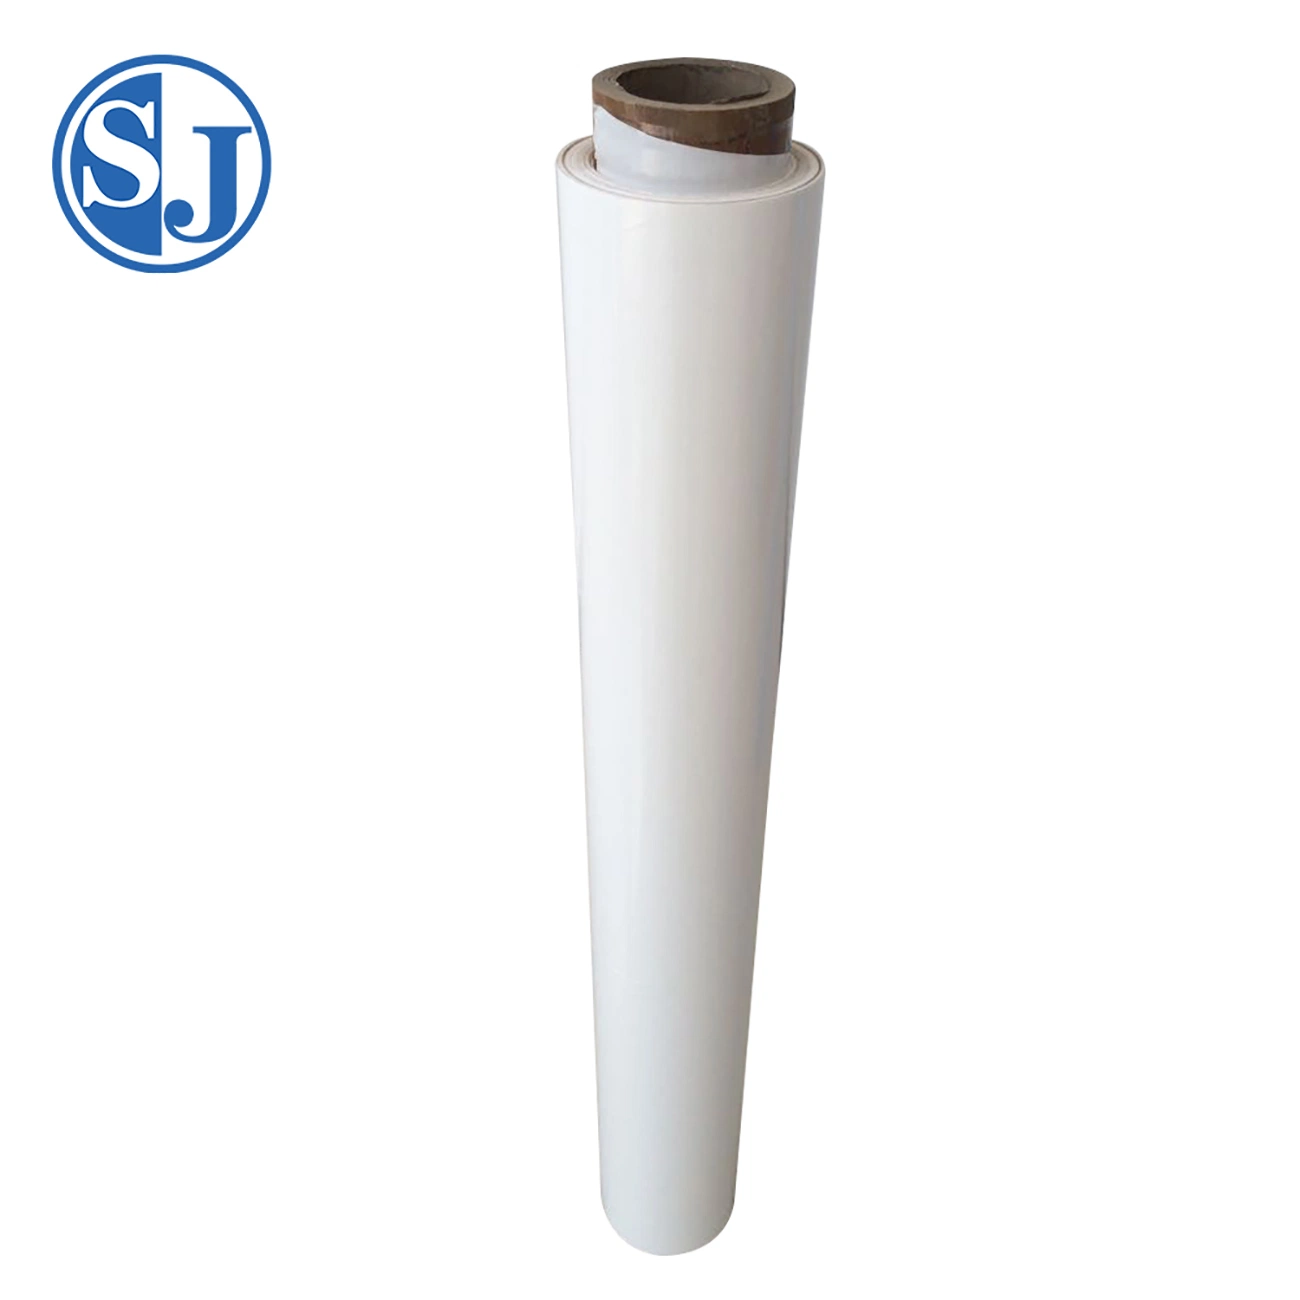 White Release Film Base Material with High Temperature Resistance for Printing and Packaging